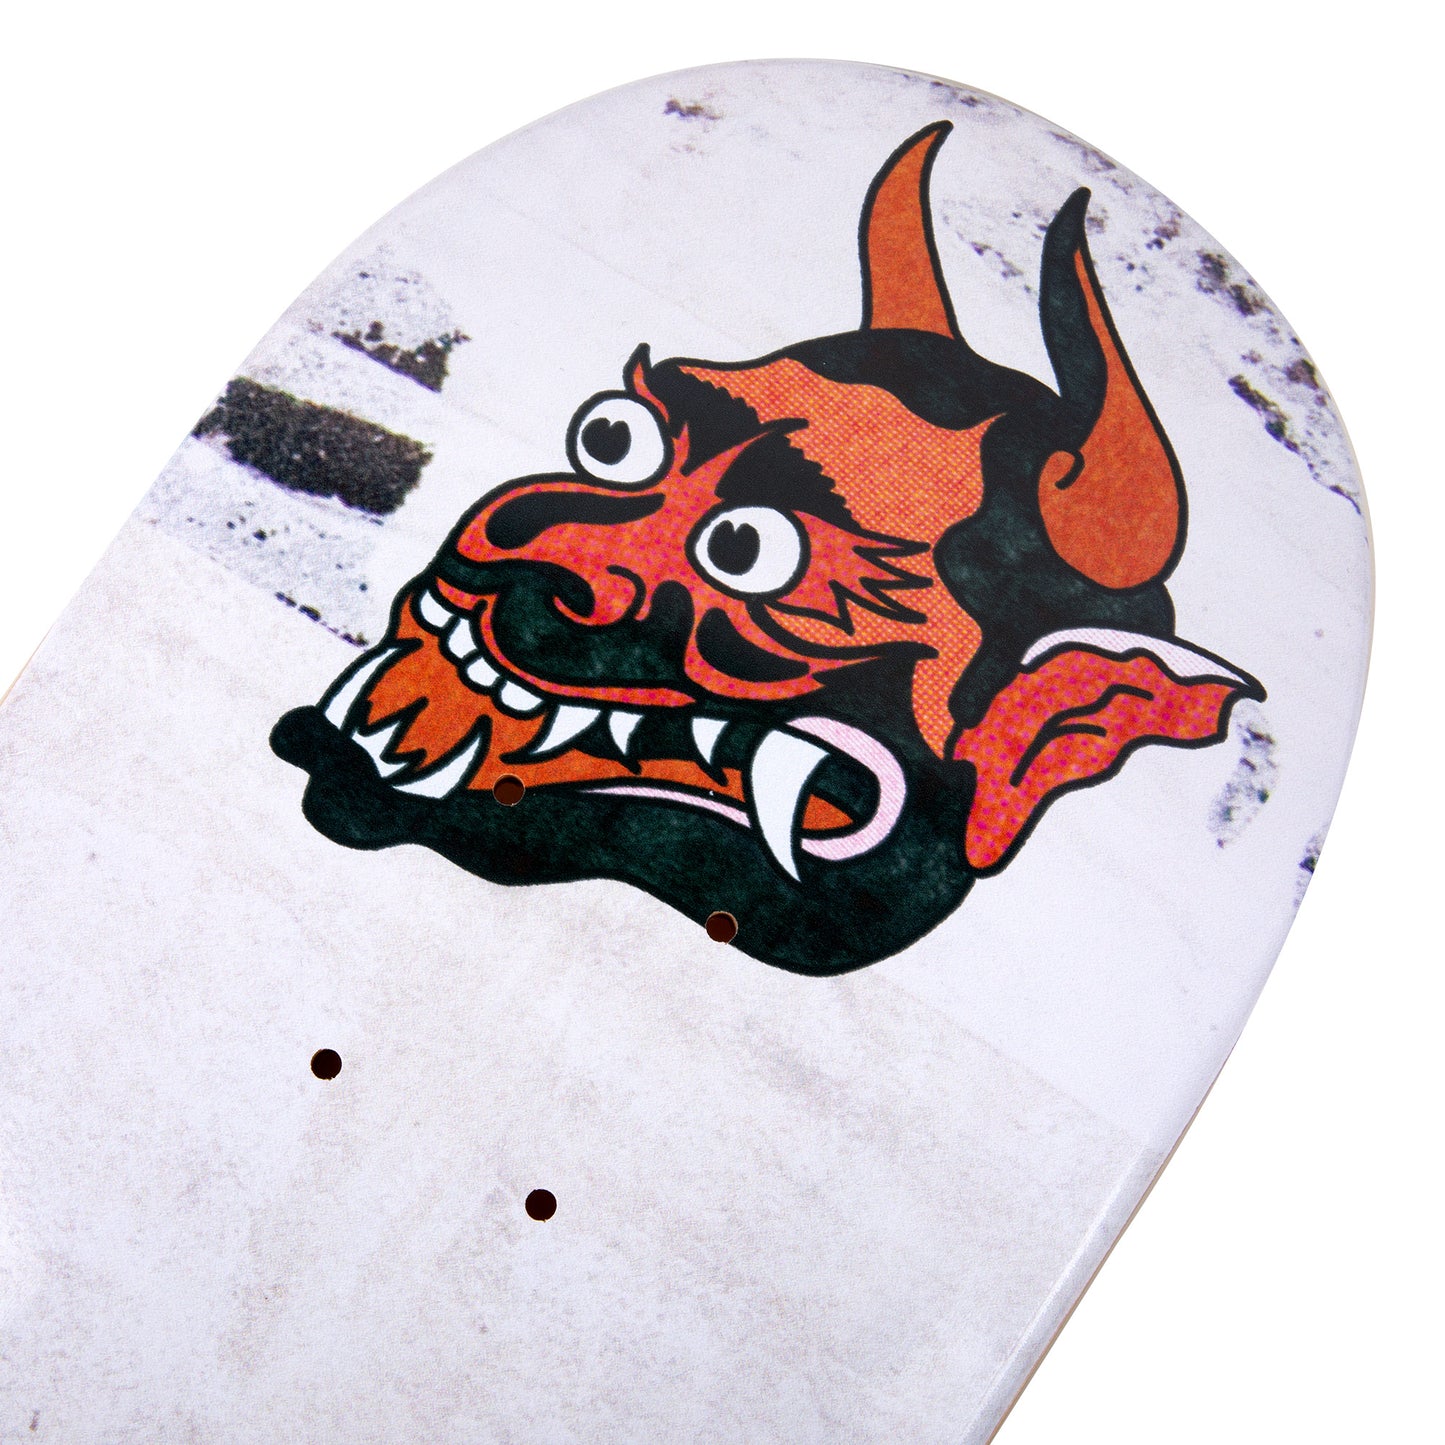 cold pressed cal 7 skateboard deck with bulldog and demon graphic